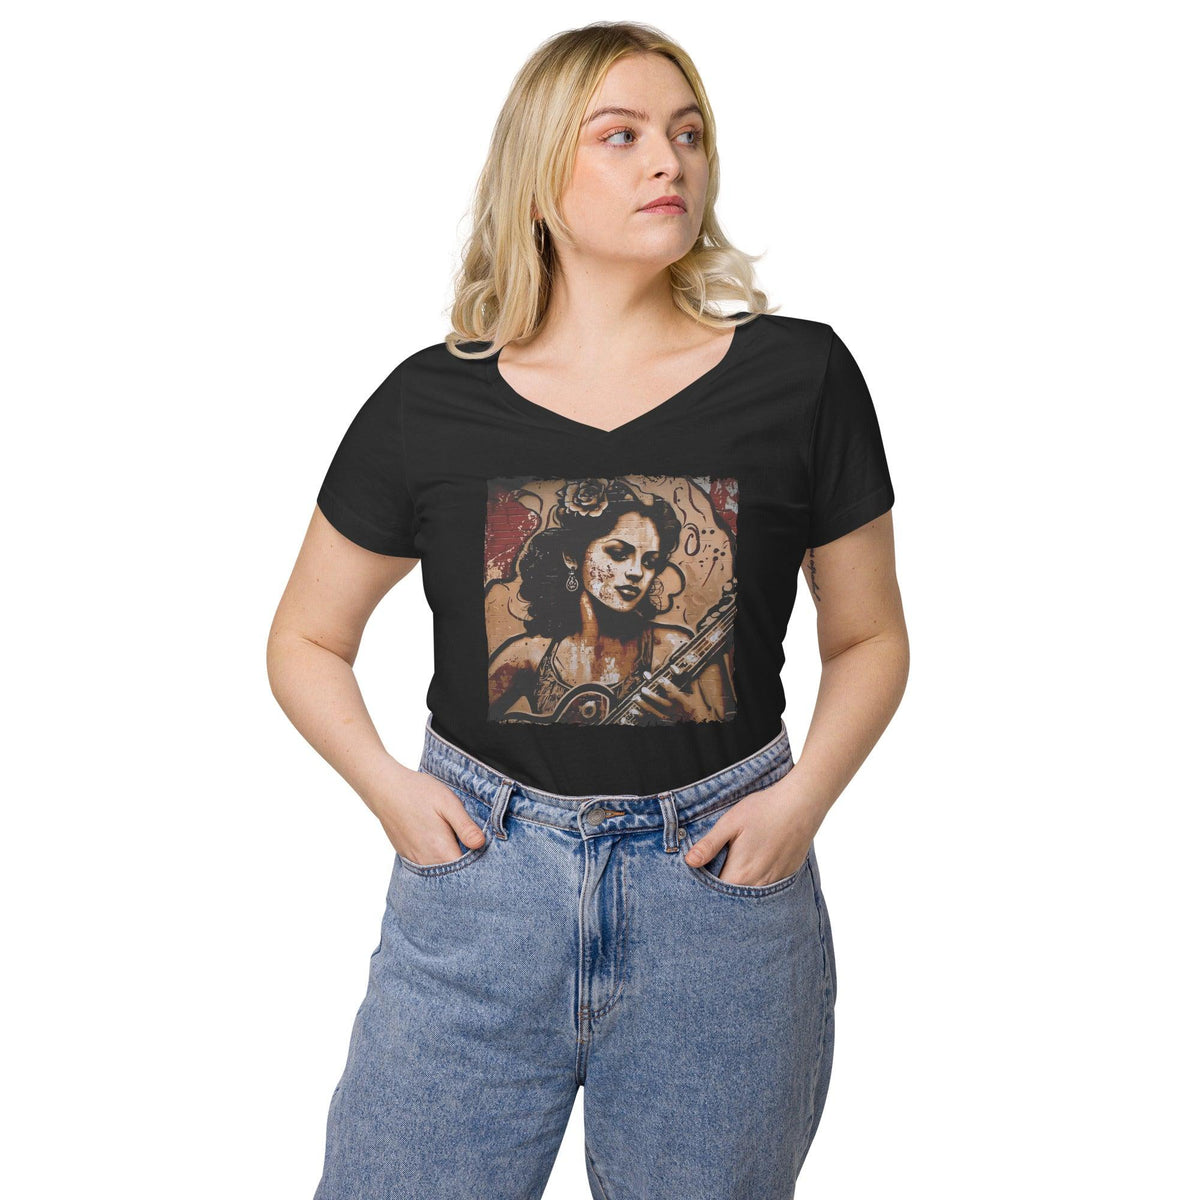 Flowing Passion, Roaring Guitar Women’s Fitted V-neck T-shirt - Beyond T-shirts